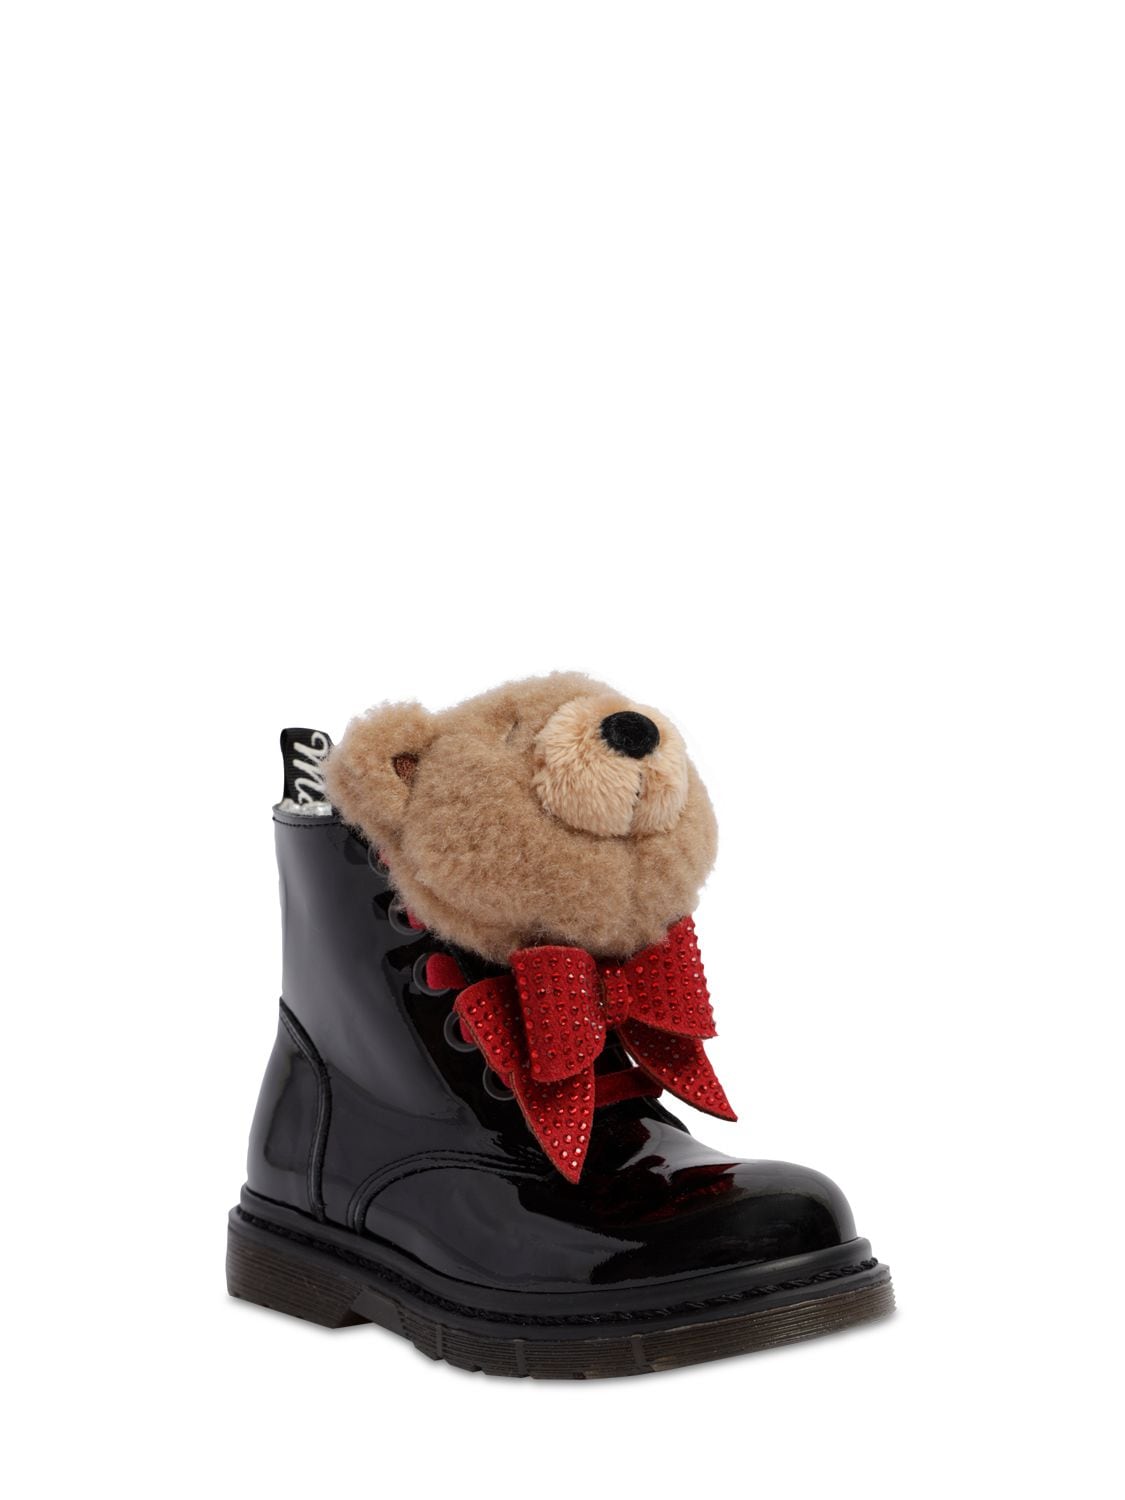 Monnalisa Kids' Patent Leather Boots W/ Teddy In Black